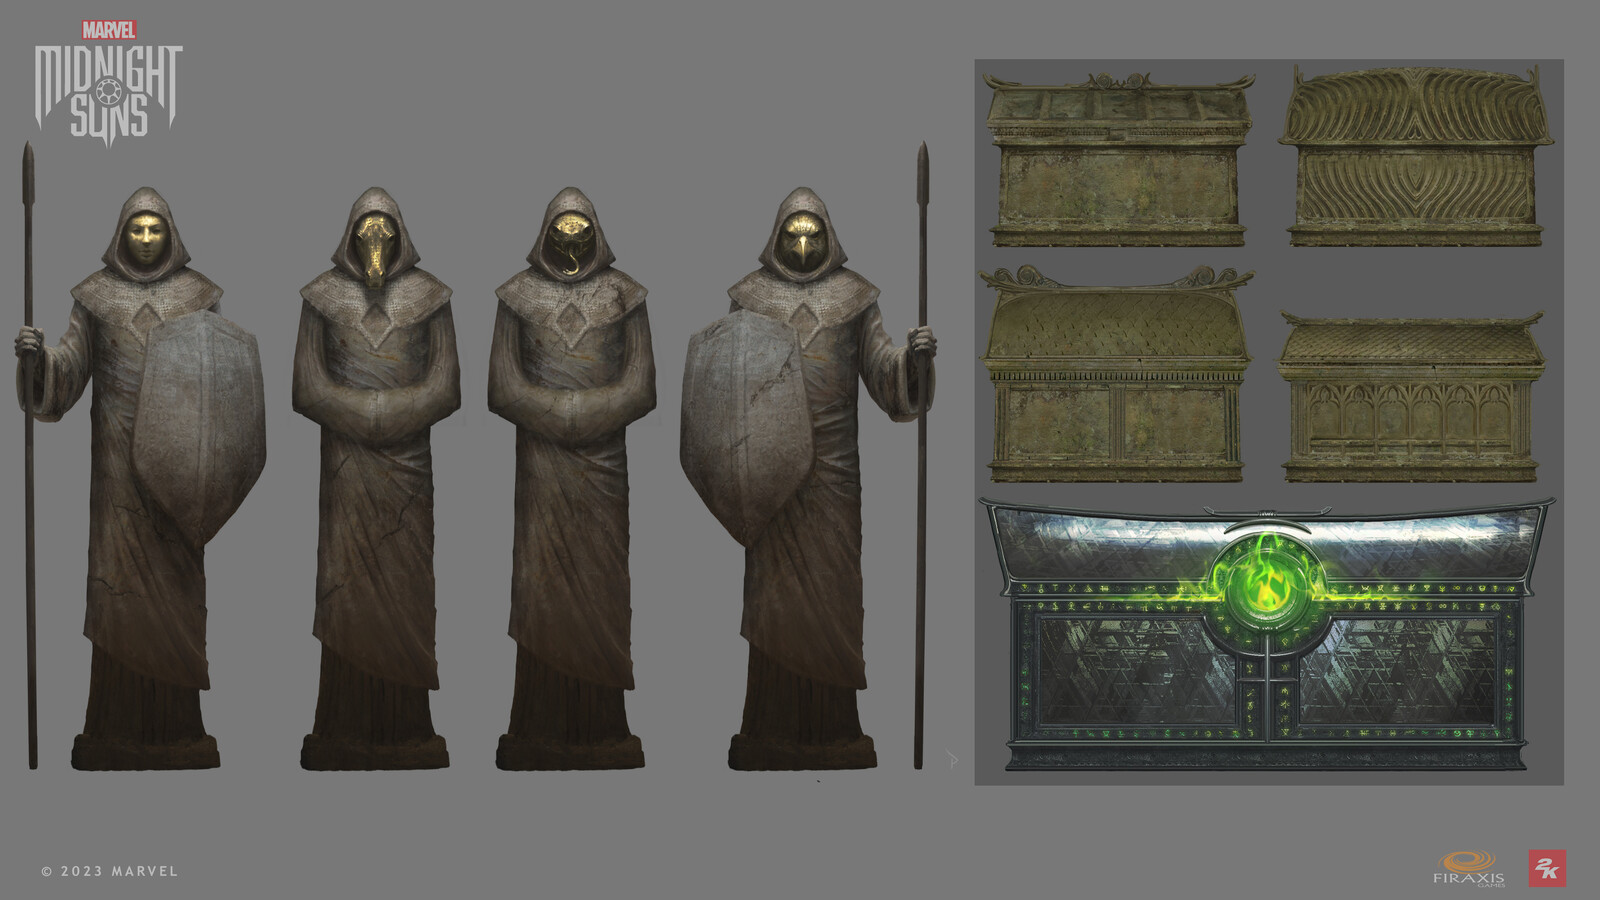 Statues depicting ancient powers, and some ideas for sarcophagi.